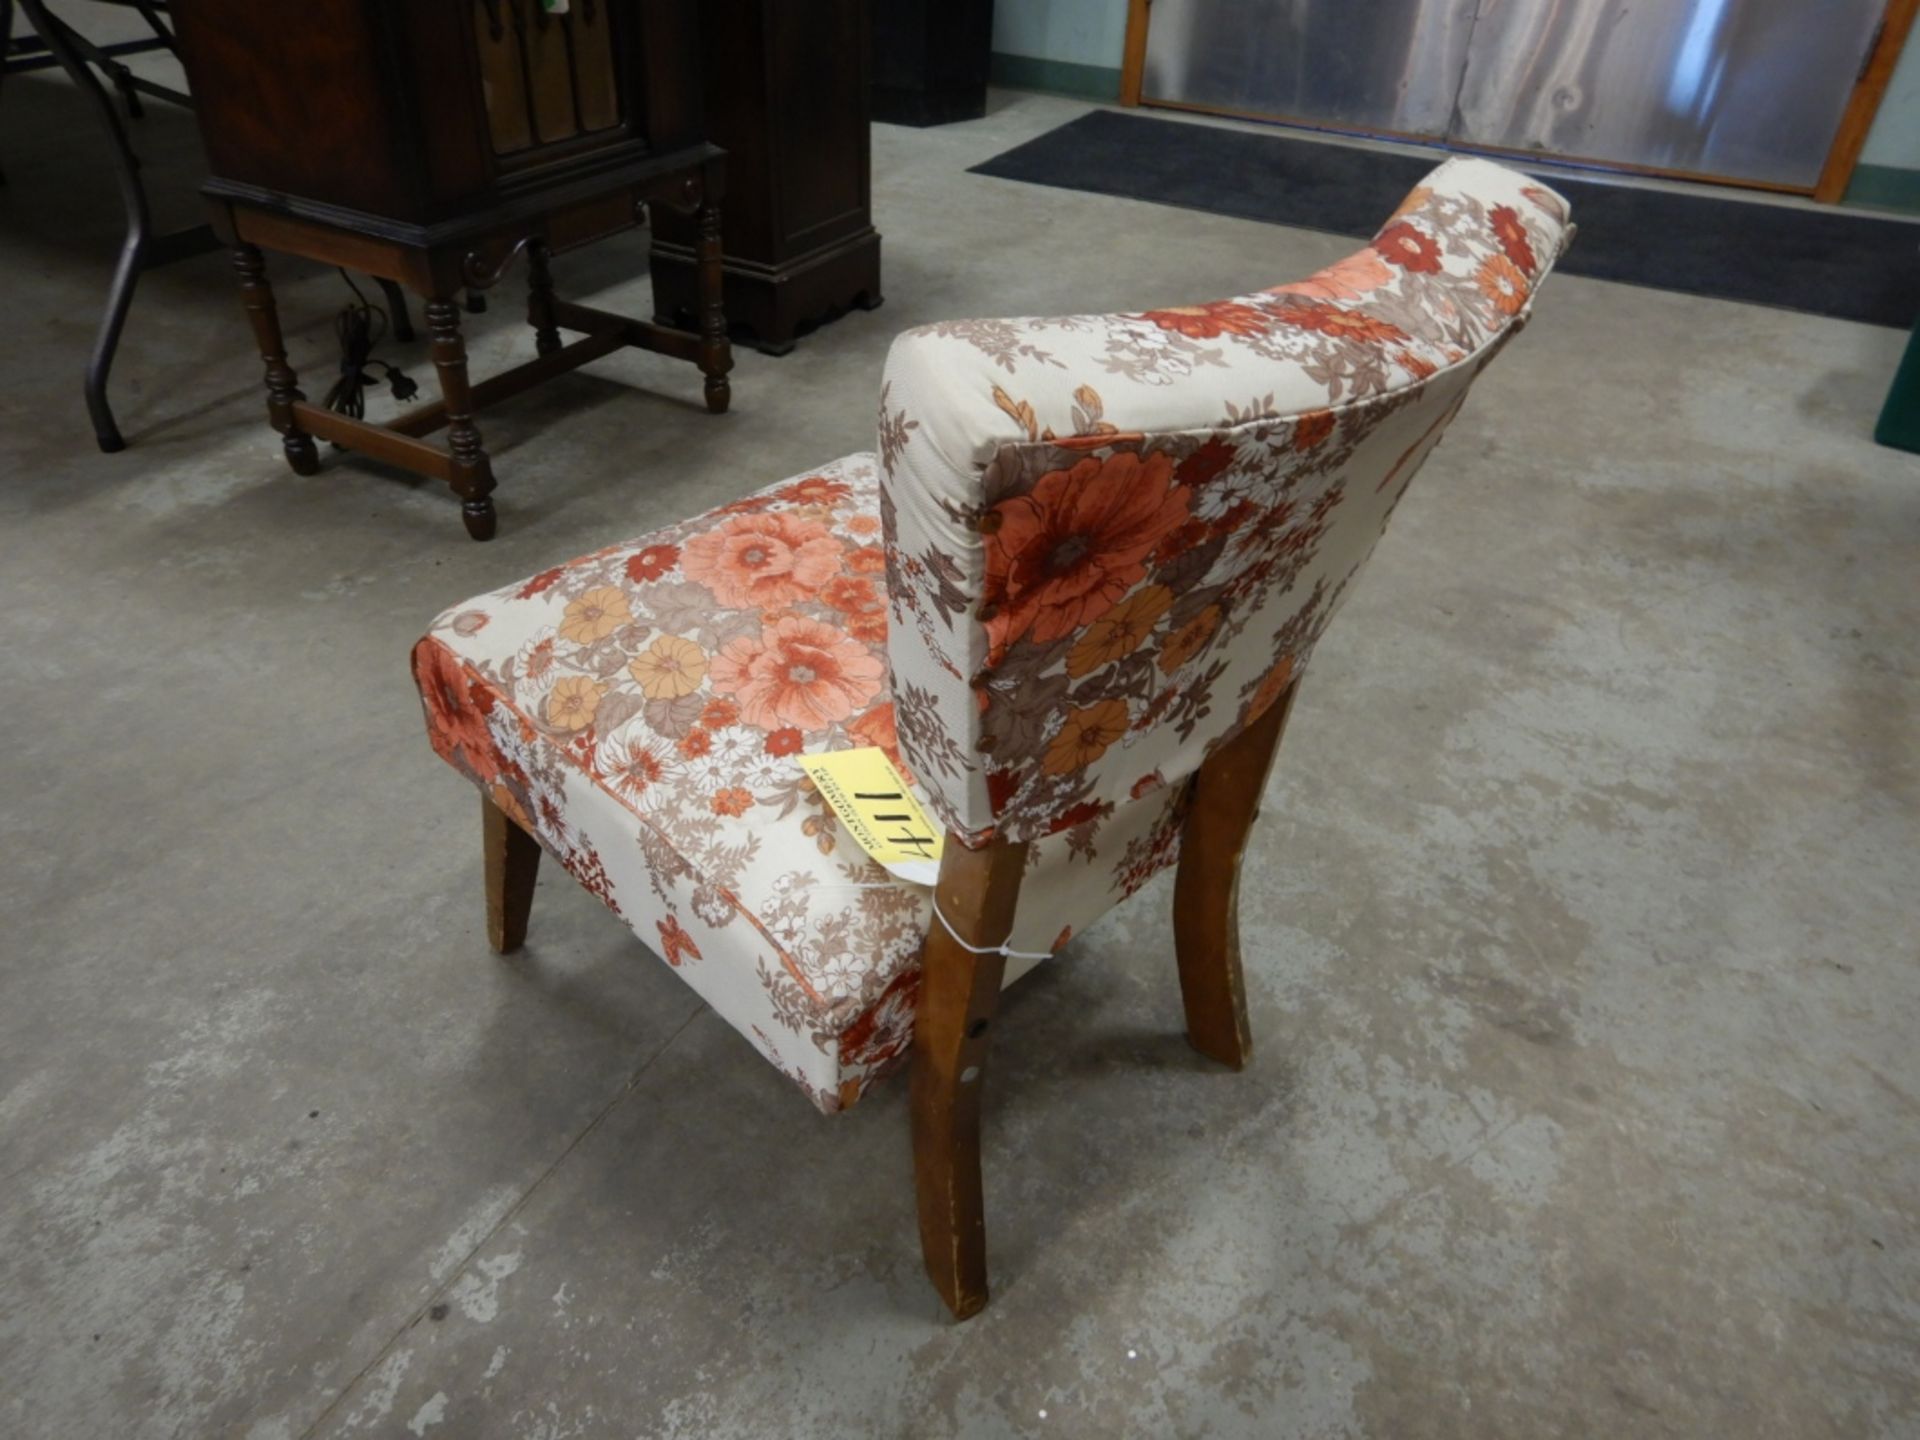 RETRO FLORAL UPHOLSTERED CHAIR - Image 2 of 2